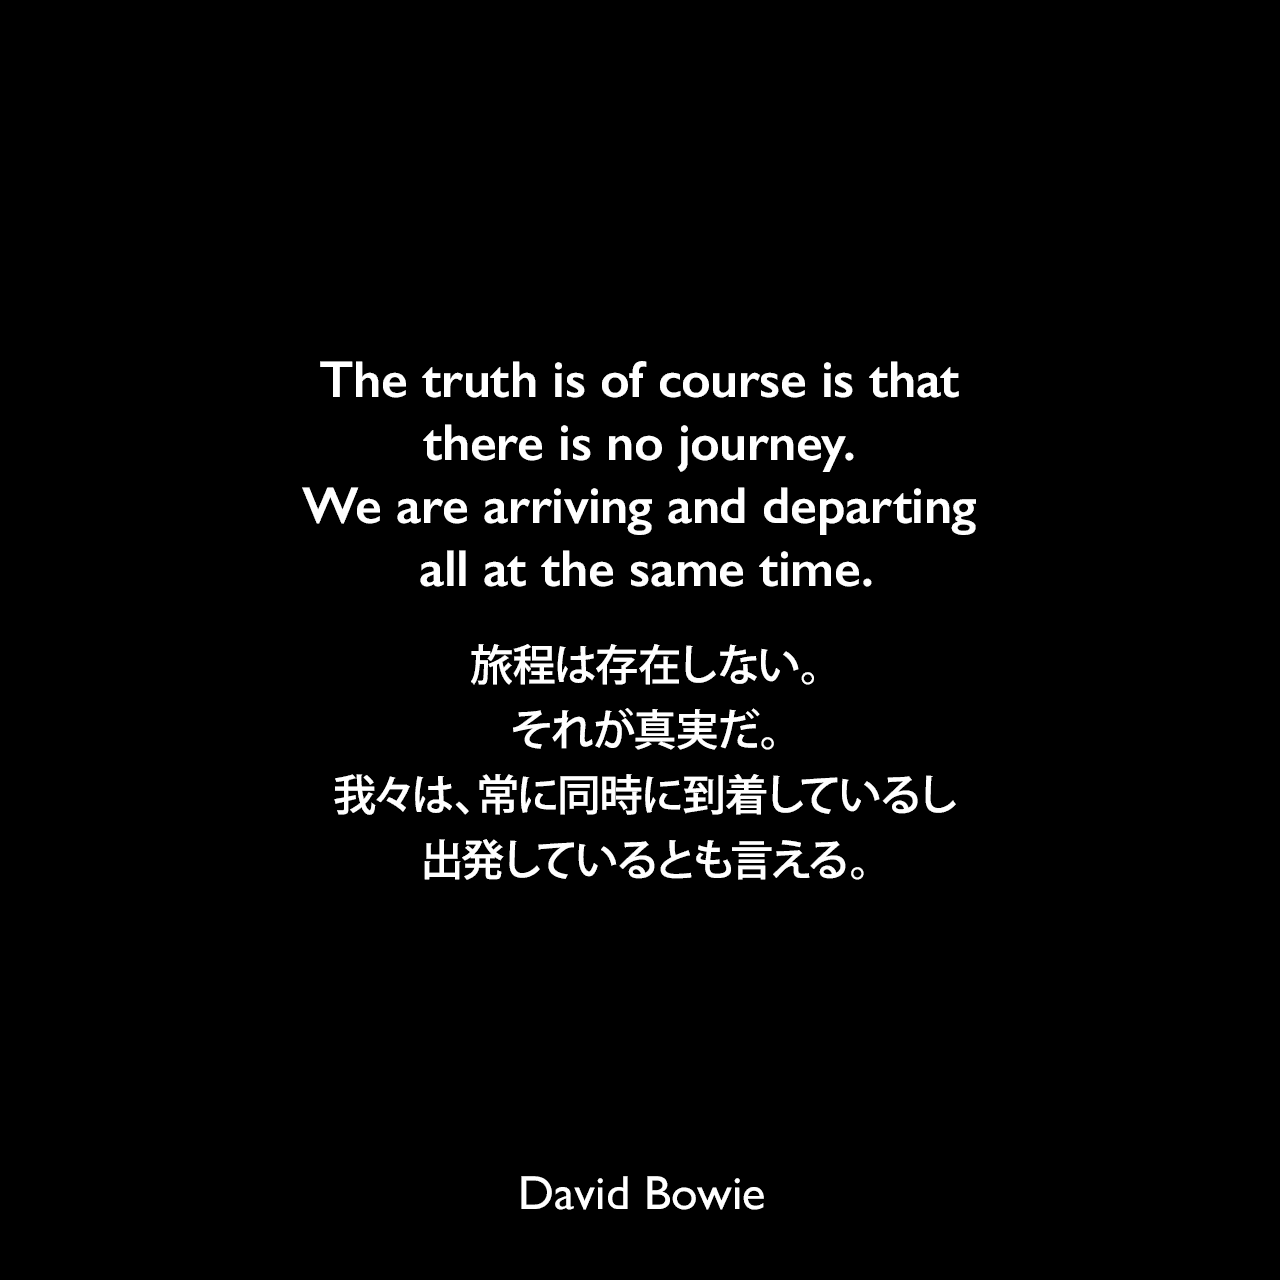 The truth is of course is that there is no journey. We are arriving and departing all at the same time.旅程は存在しない。それが真実だ。我々は、常に同時に到着しているし出発しているとも言える。David Bowie